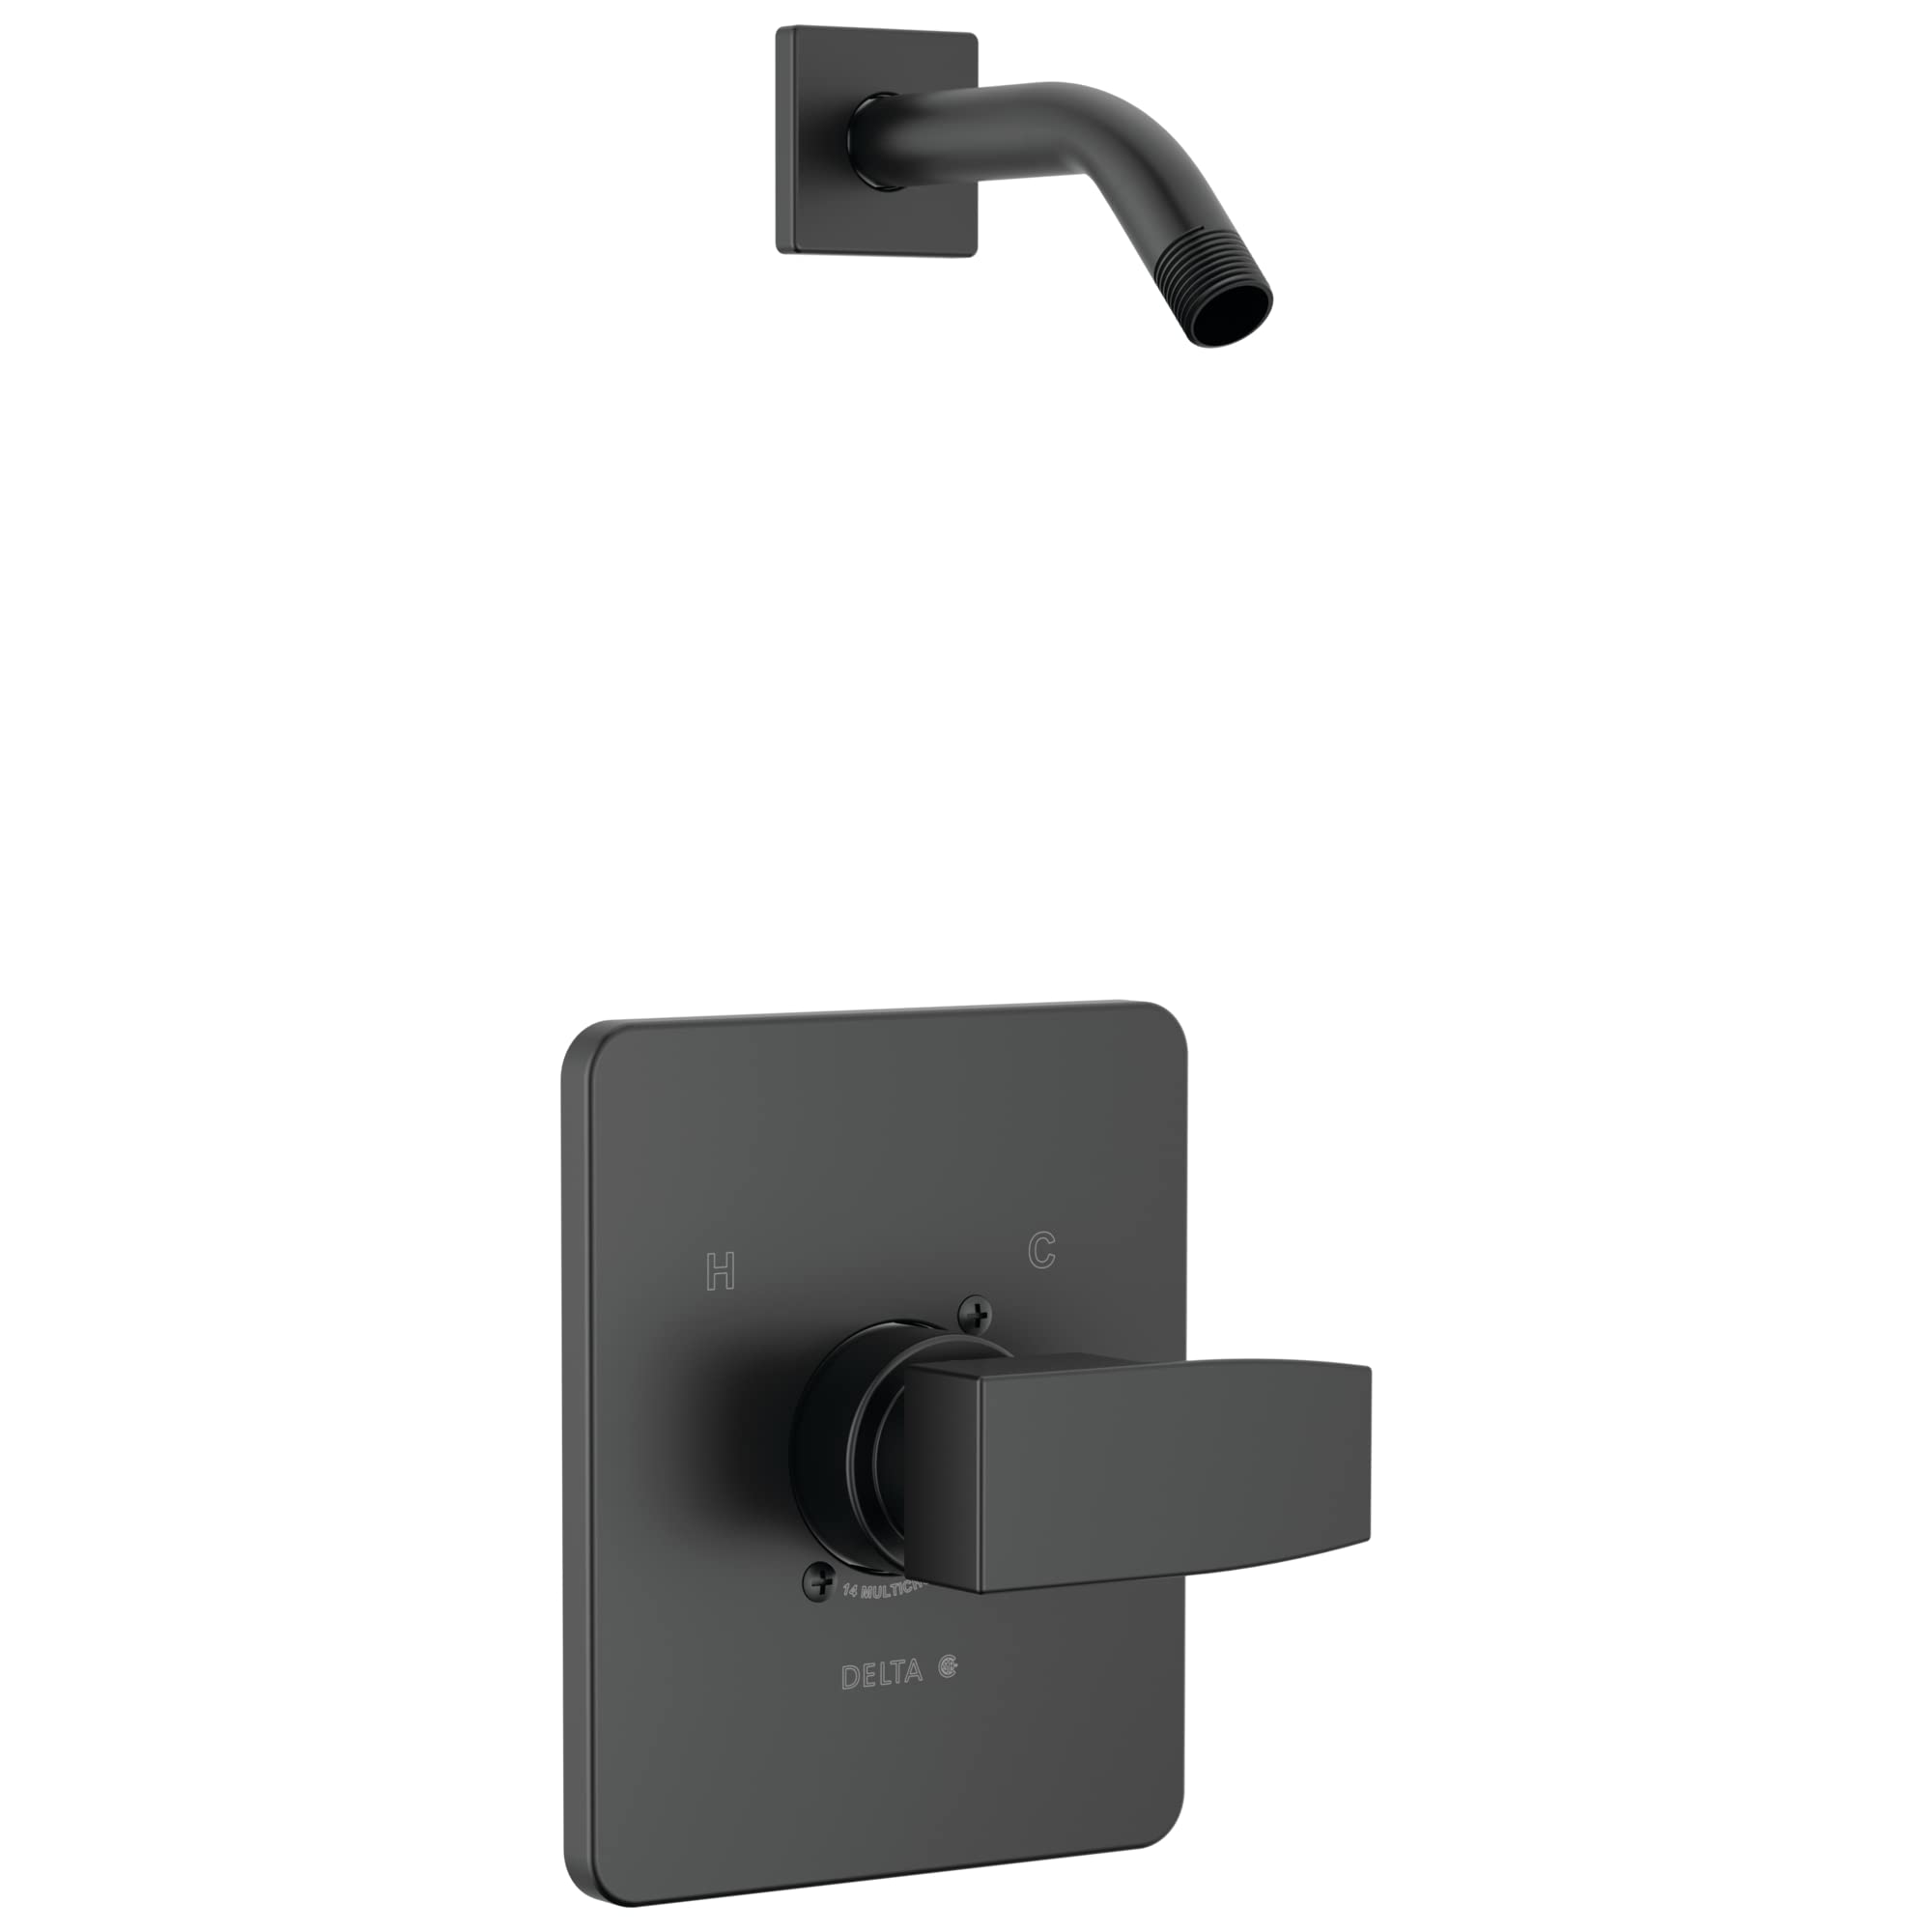 Delta Faucet Modern Single Handle Matte Black Shower Faucet Set, Matte Black Shower Trim Kit, Shower Fixtures, Shower Handle, Matte Black T14267-BLLHD-PP (Shower Head and Valve Not Included)